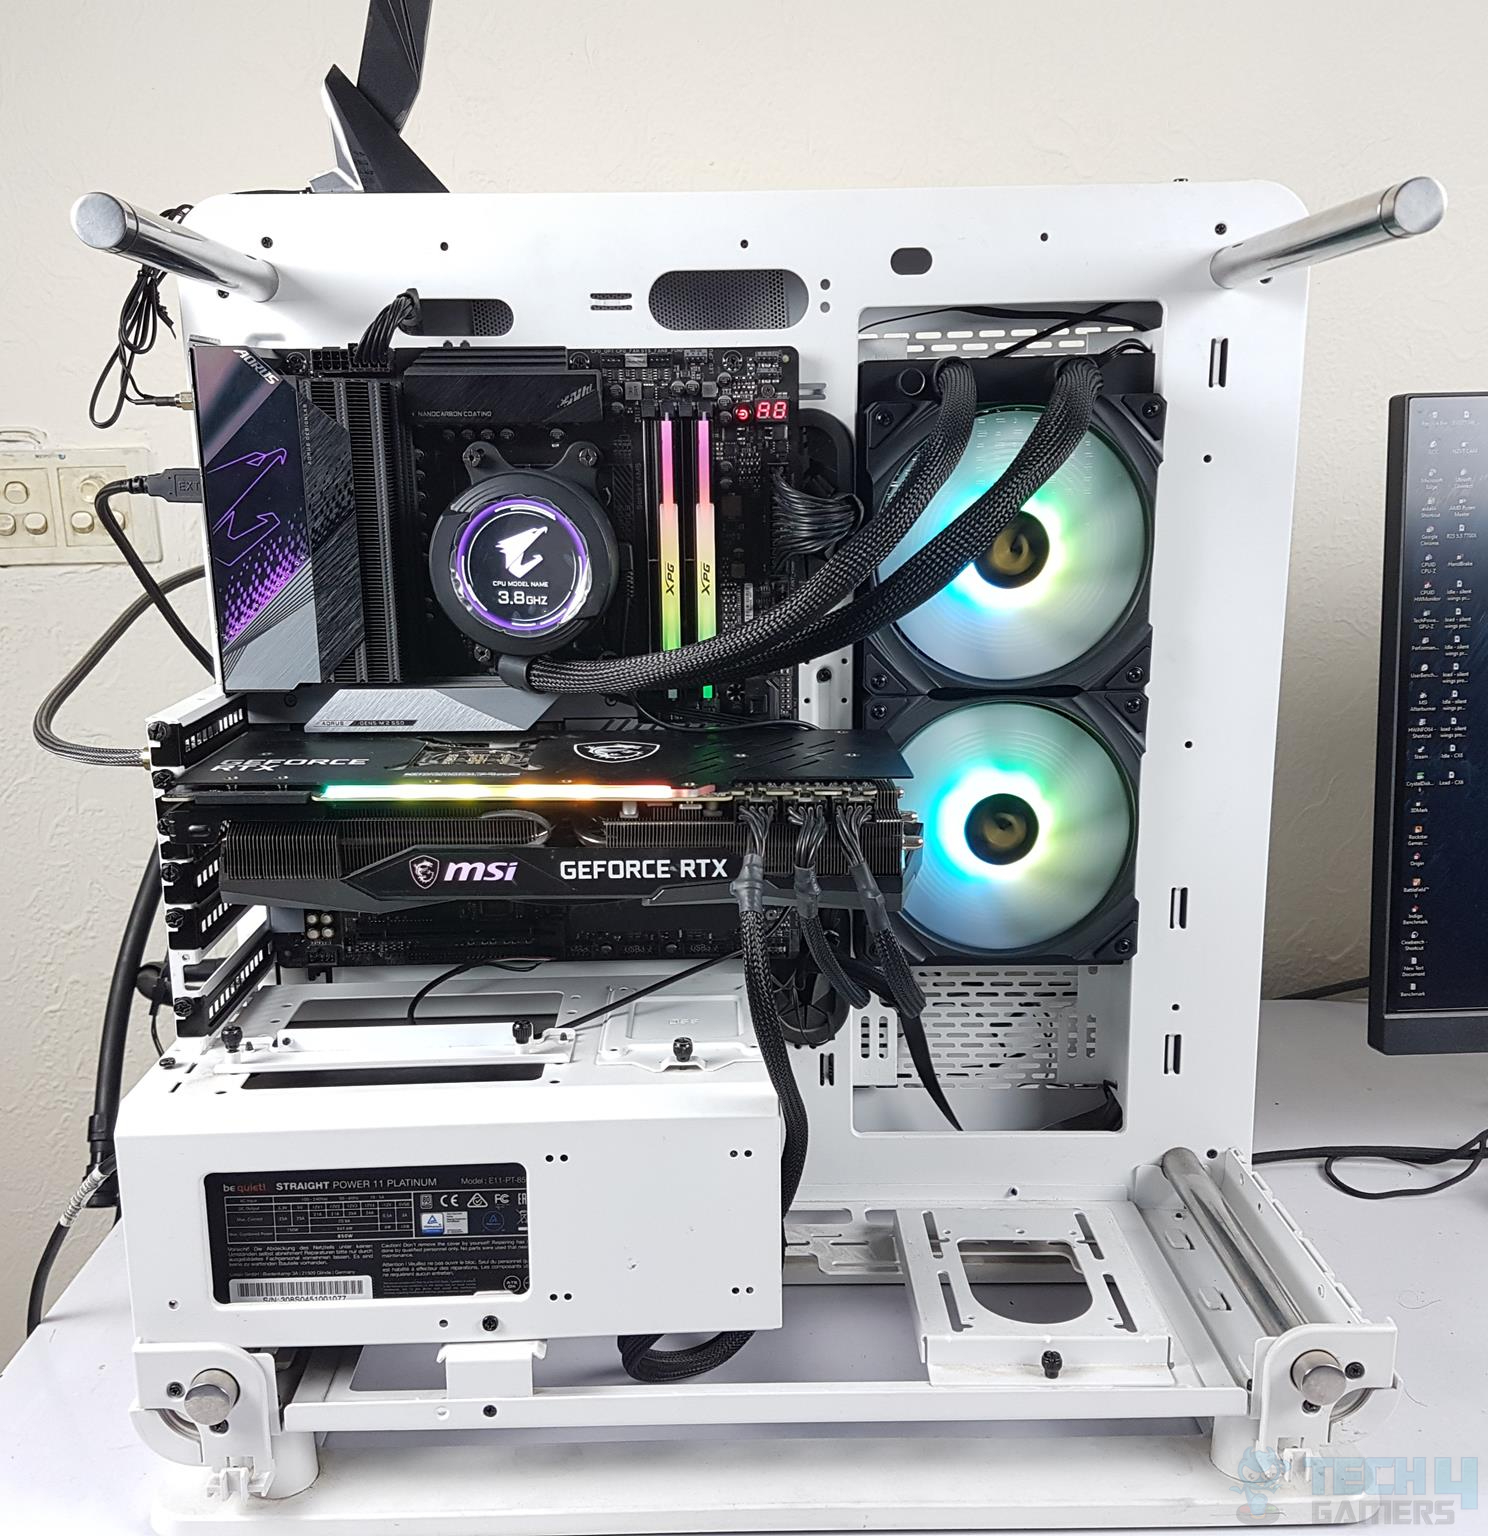 AORUS WATERFORCE X 280 Front view of the testing rig